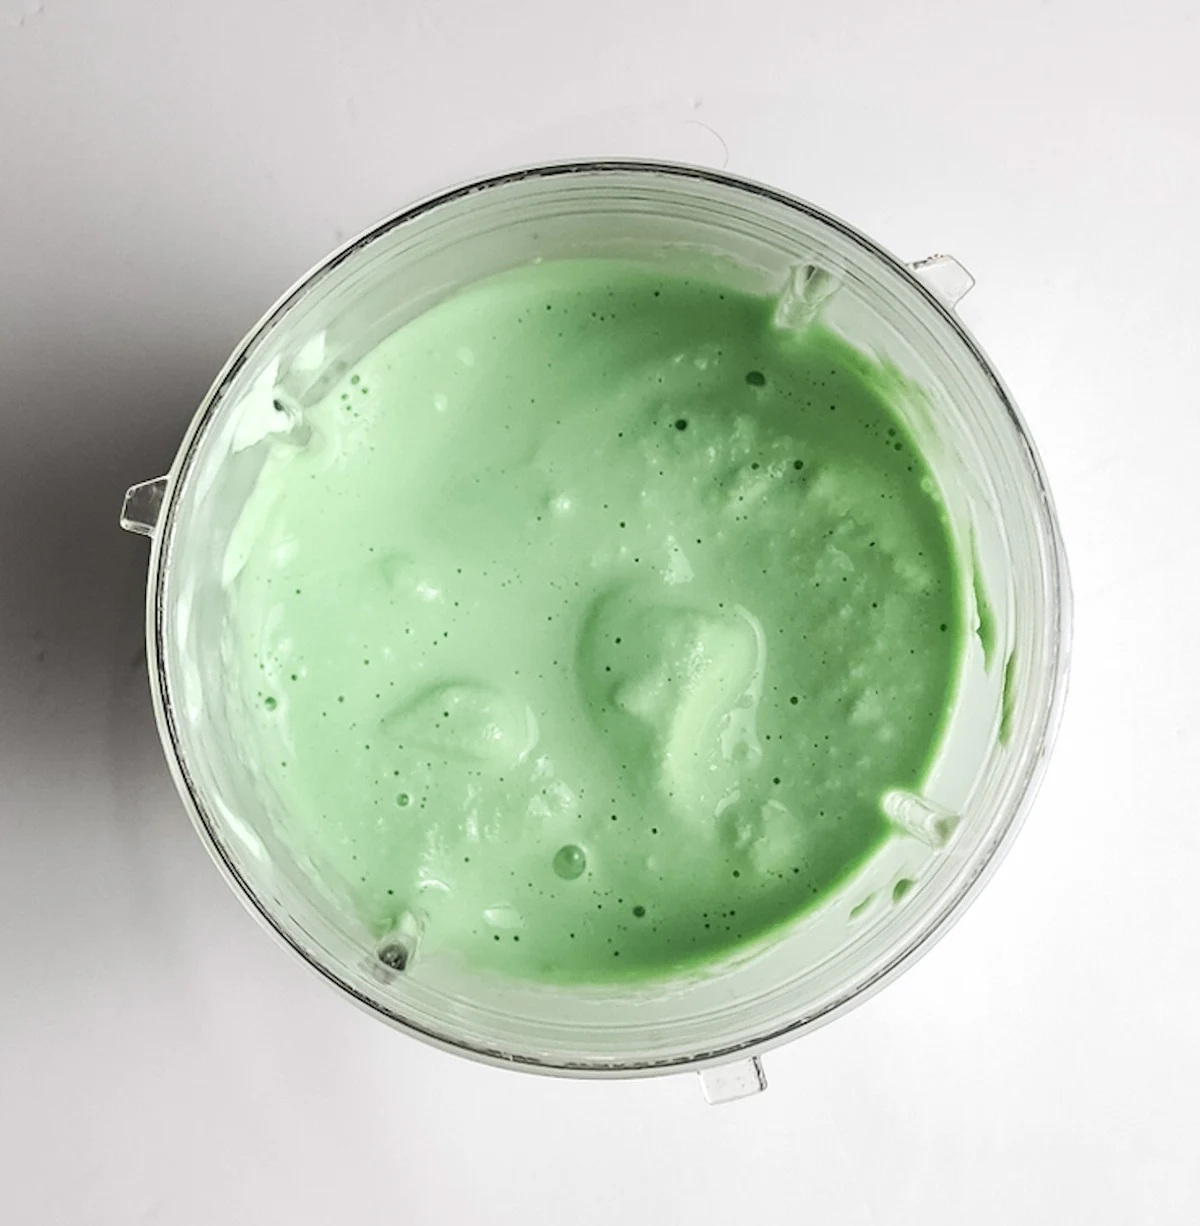 Ice cream, milk, extract blended with green food coloring